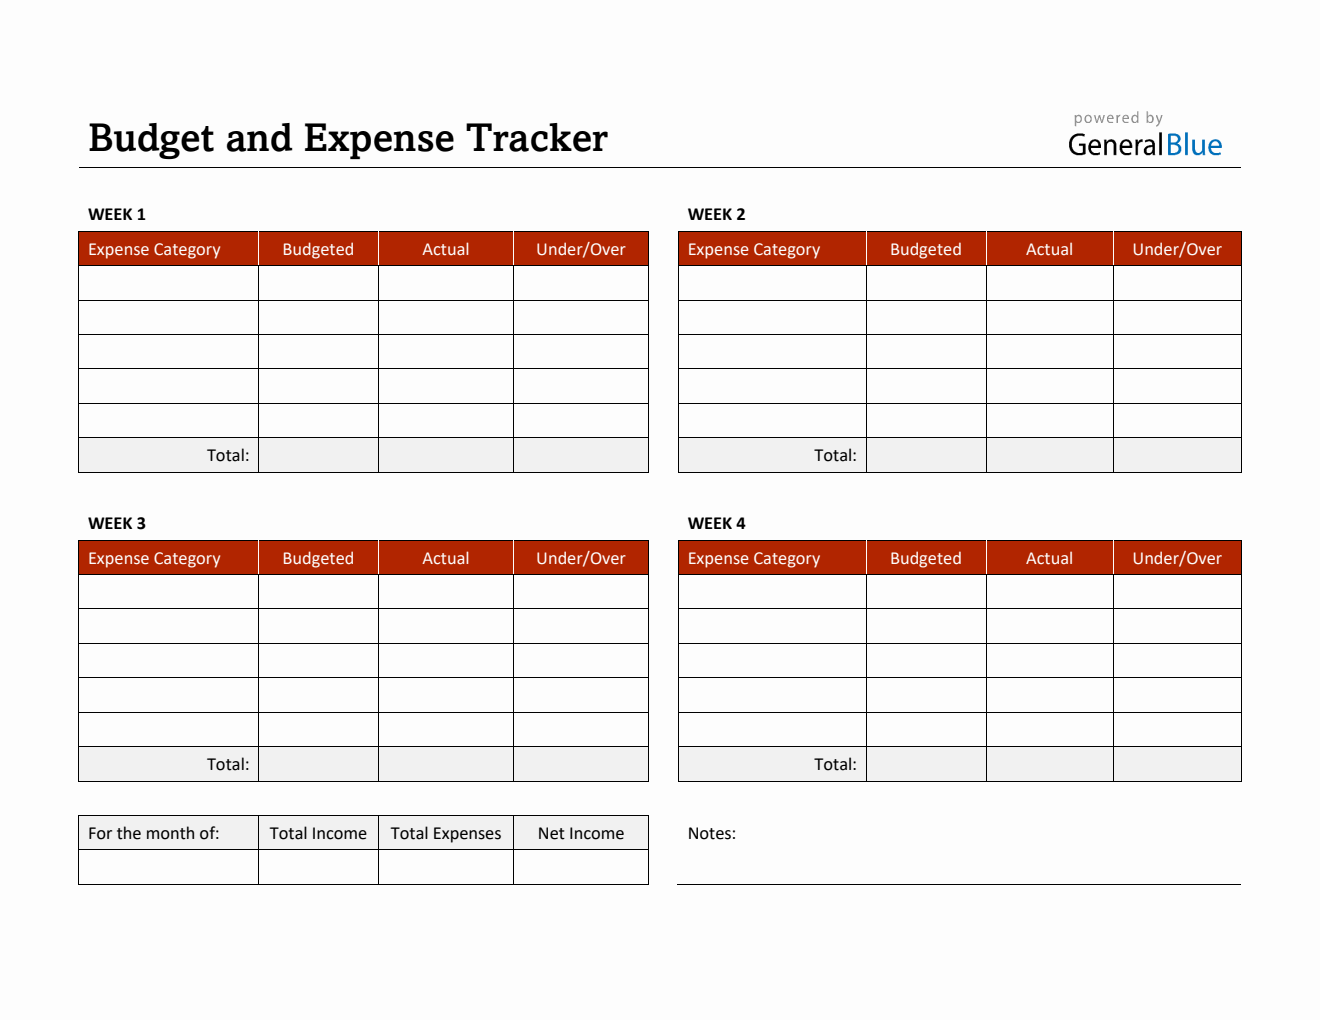 Budget and Expense Tracker in PDF (Red)